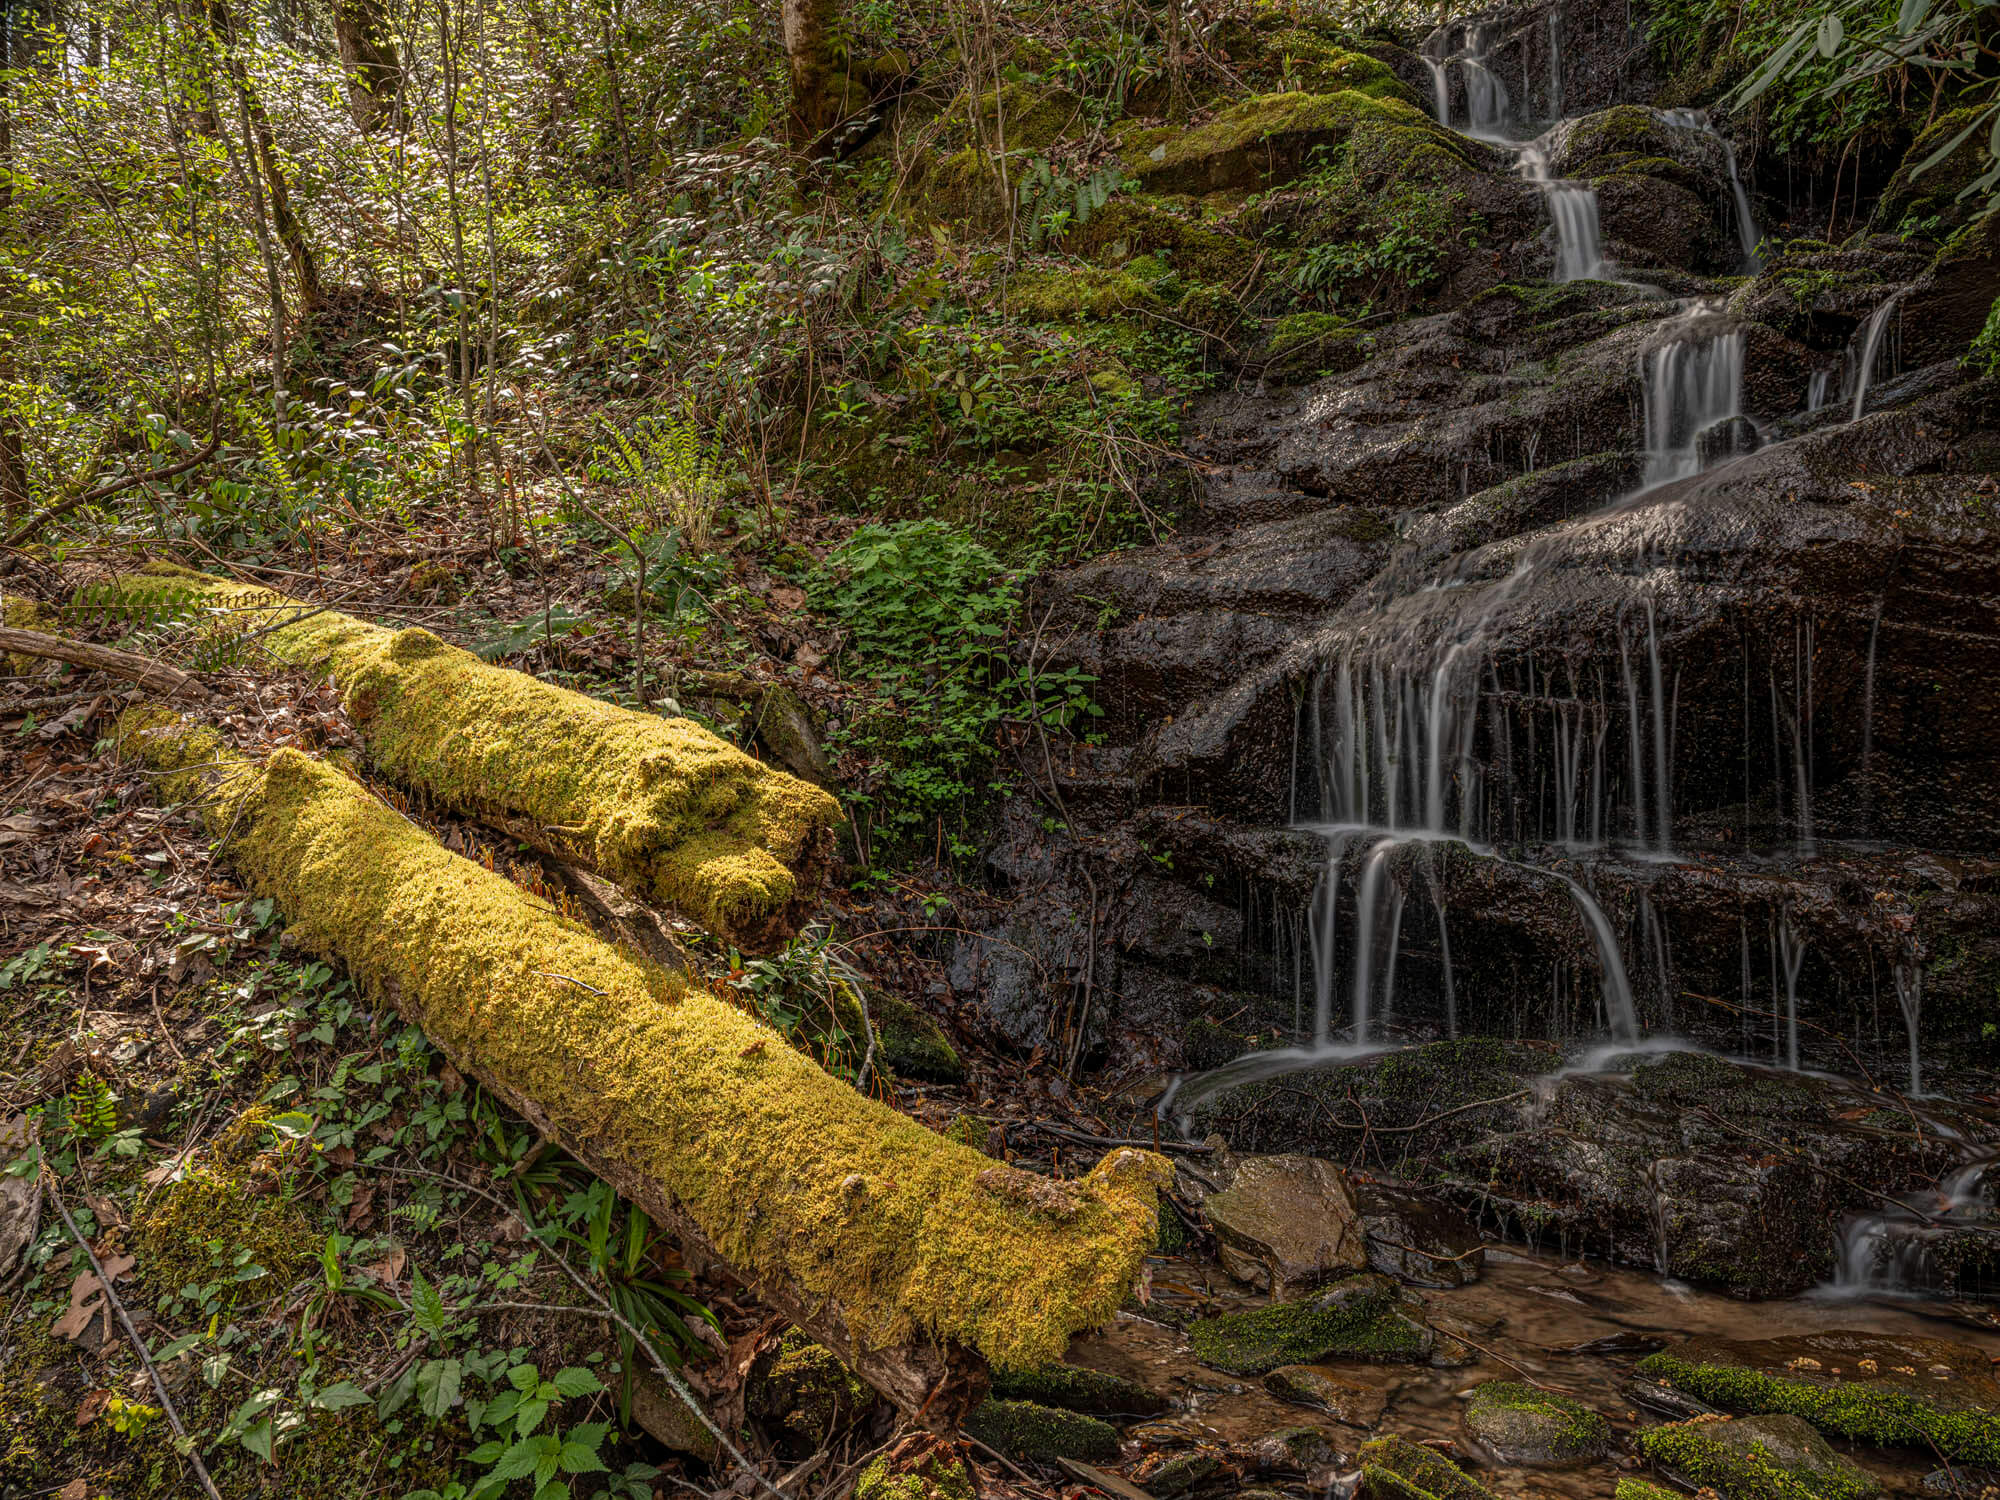 BFC EV Two Logs and Small FAlls 1.1 f14.8 (Great Smoky Mountains) - By Tillman Crane